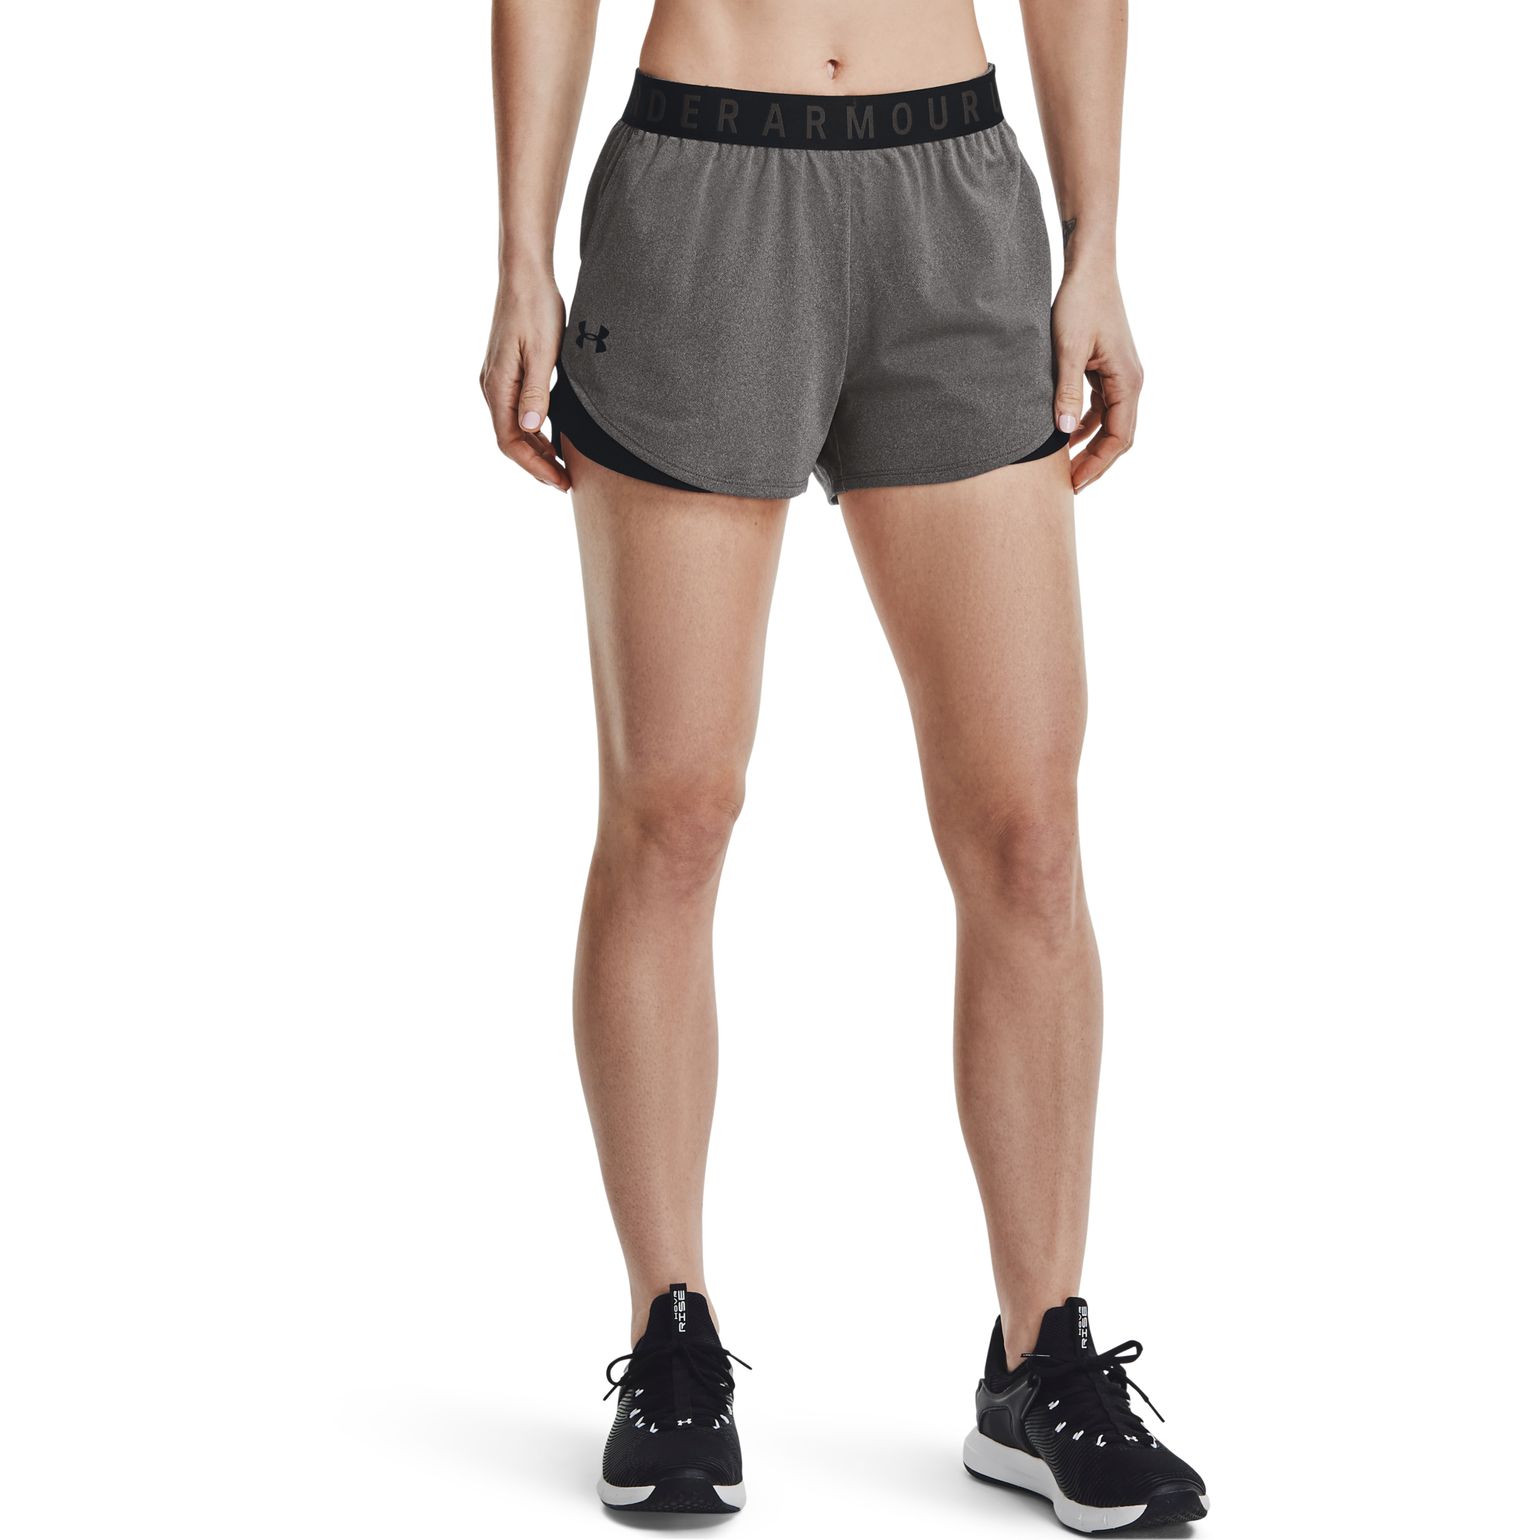 Under Armour Women's Play Up Shorts 3.0 Carbon Heather